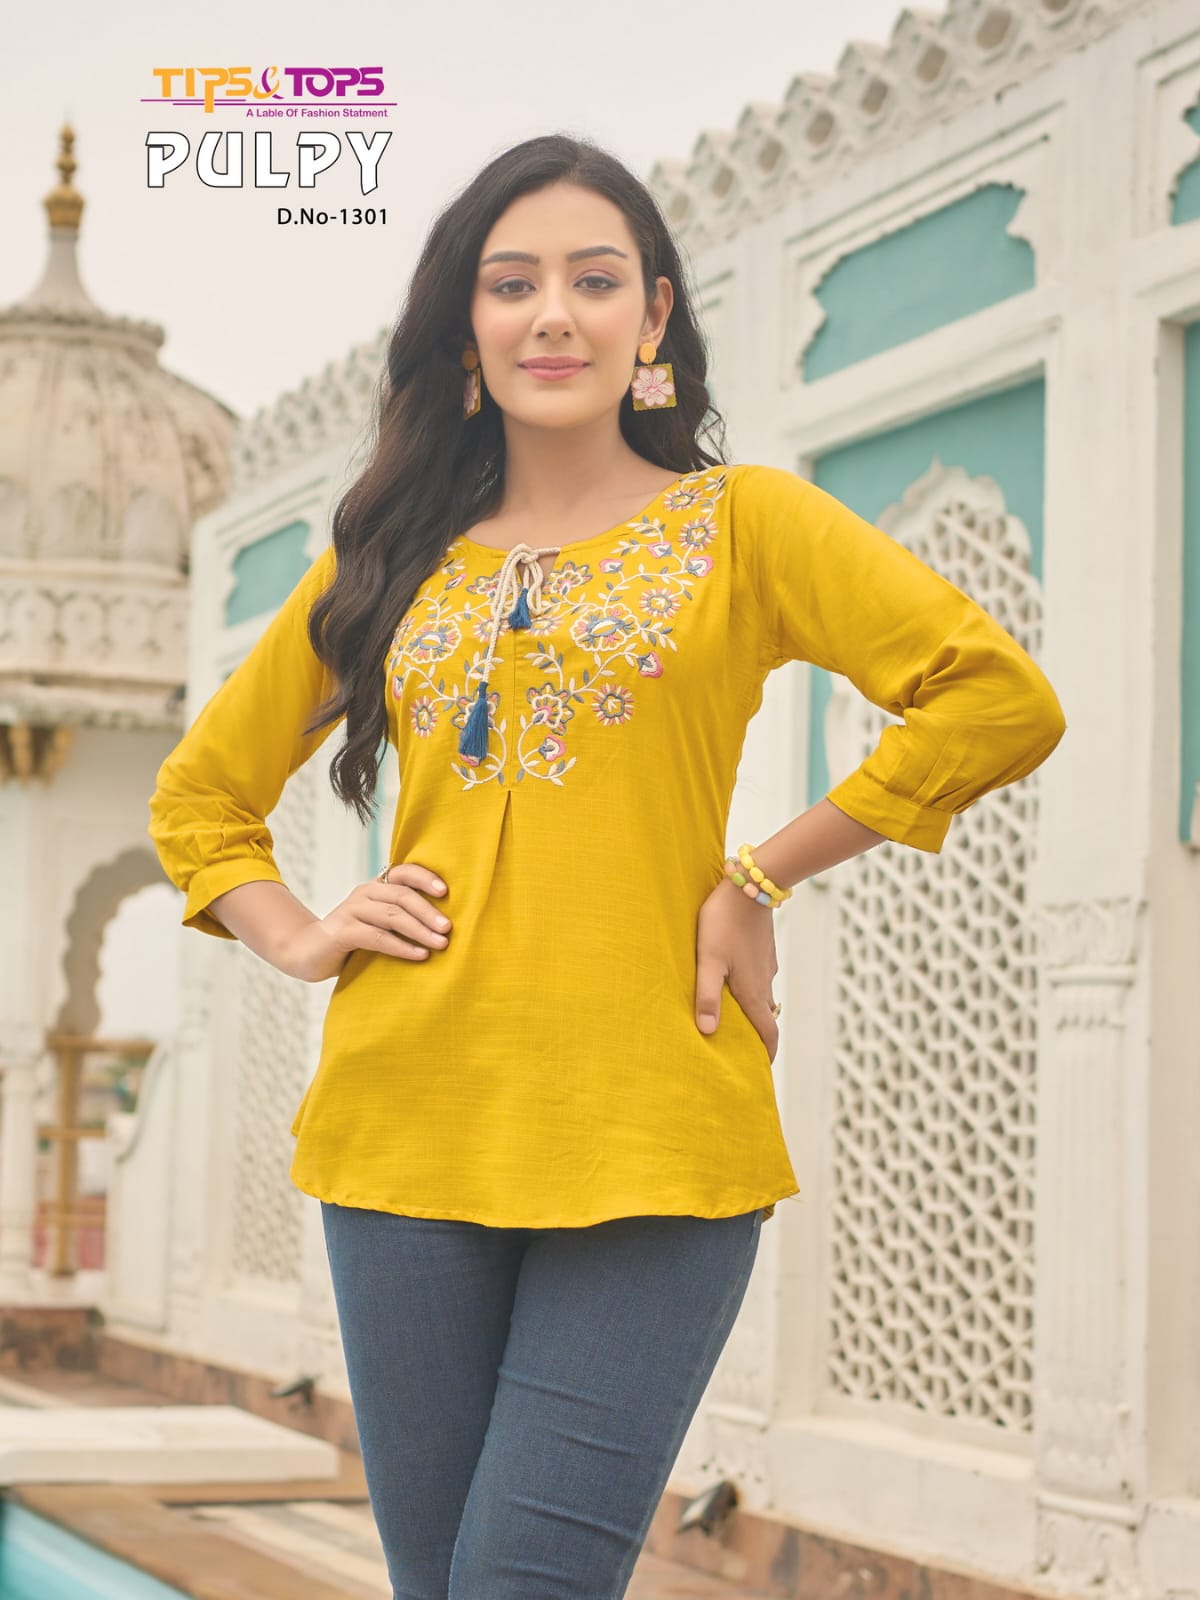 Tips Tops Pulpy Vol 13 Ladies Tops Catalog collection 5